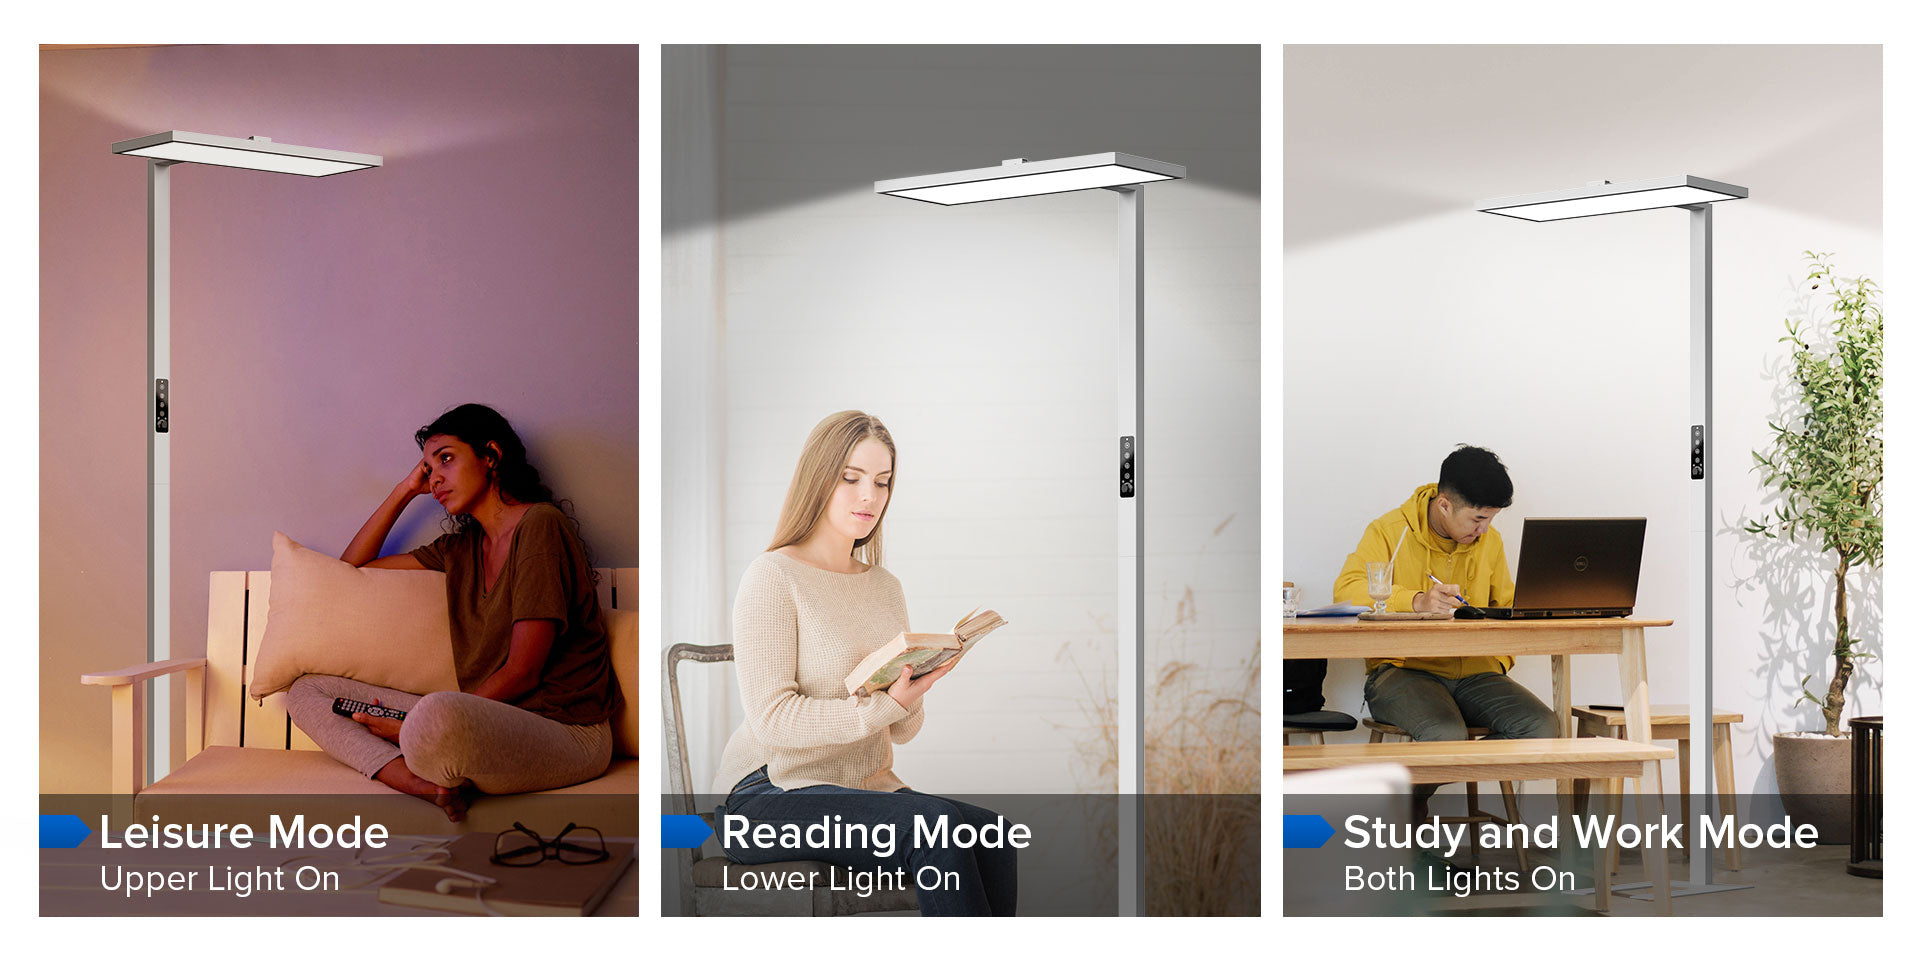 Vertical Led Desk Lamp has 3 modes, leisure mode, reading mode and study and work mode